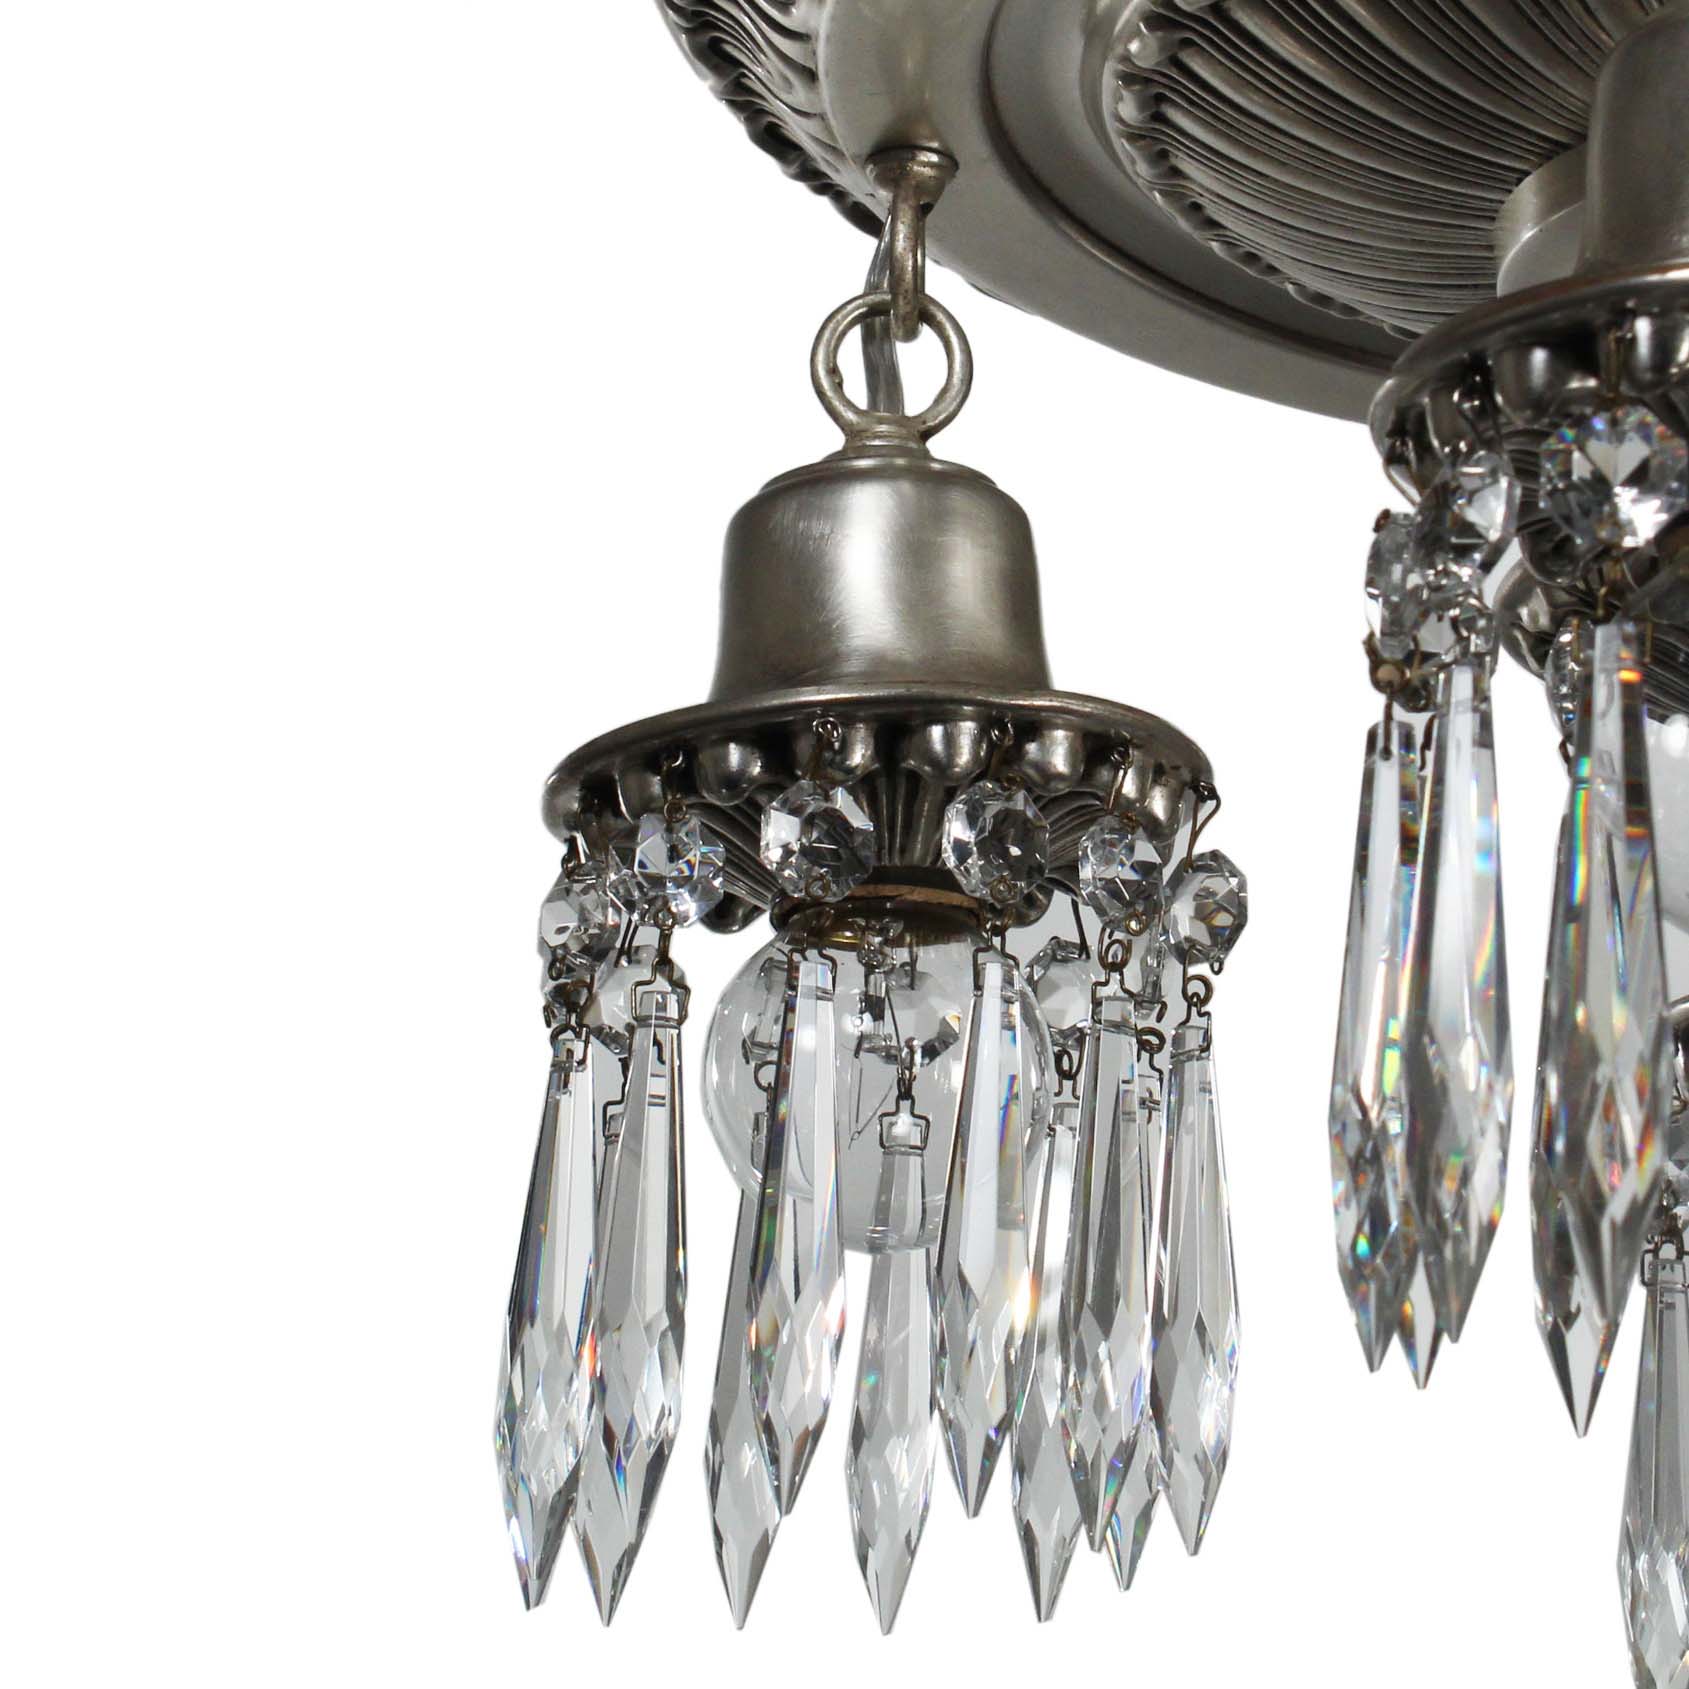 SOLD Neoclassical Silver Plated Chandelier with Prisms, Antique Lighting-69787